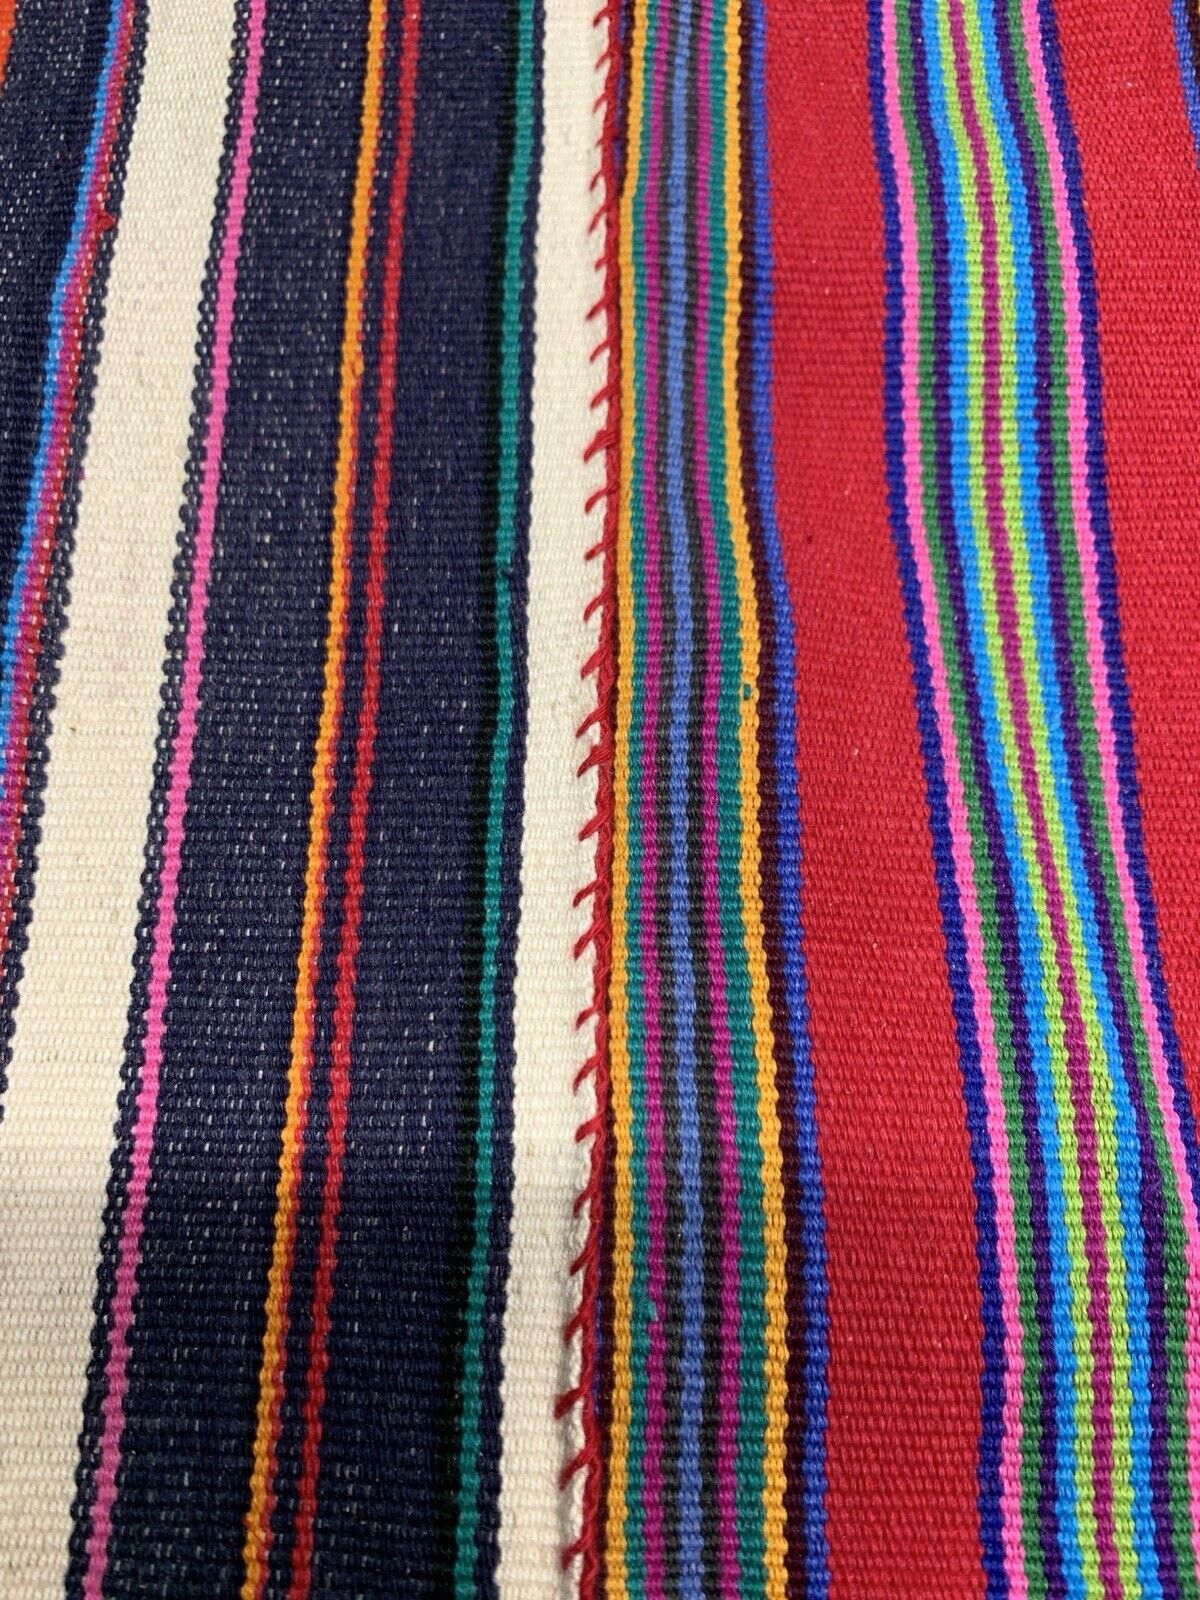 Two Peruvian Backstrap Hand Woven Table Cloth, Shawl Or Blanket 87”L X29 1/2”W 